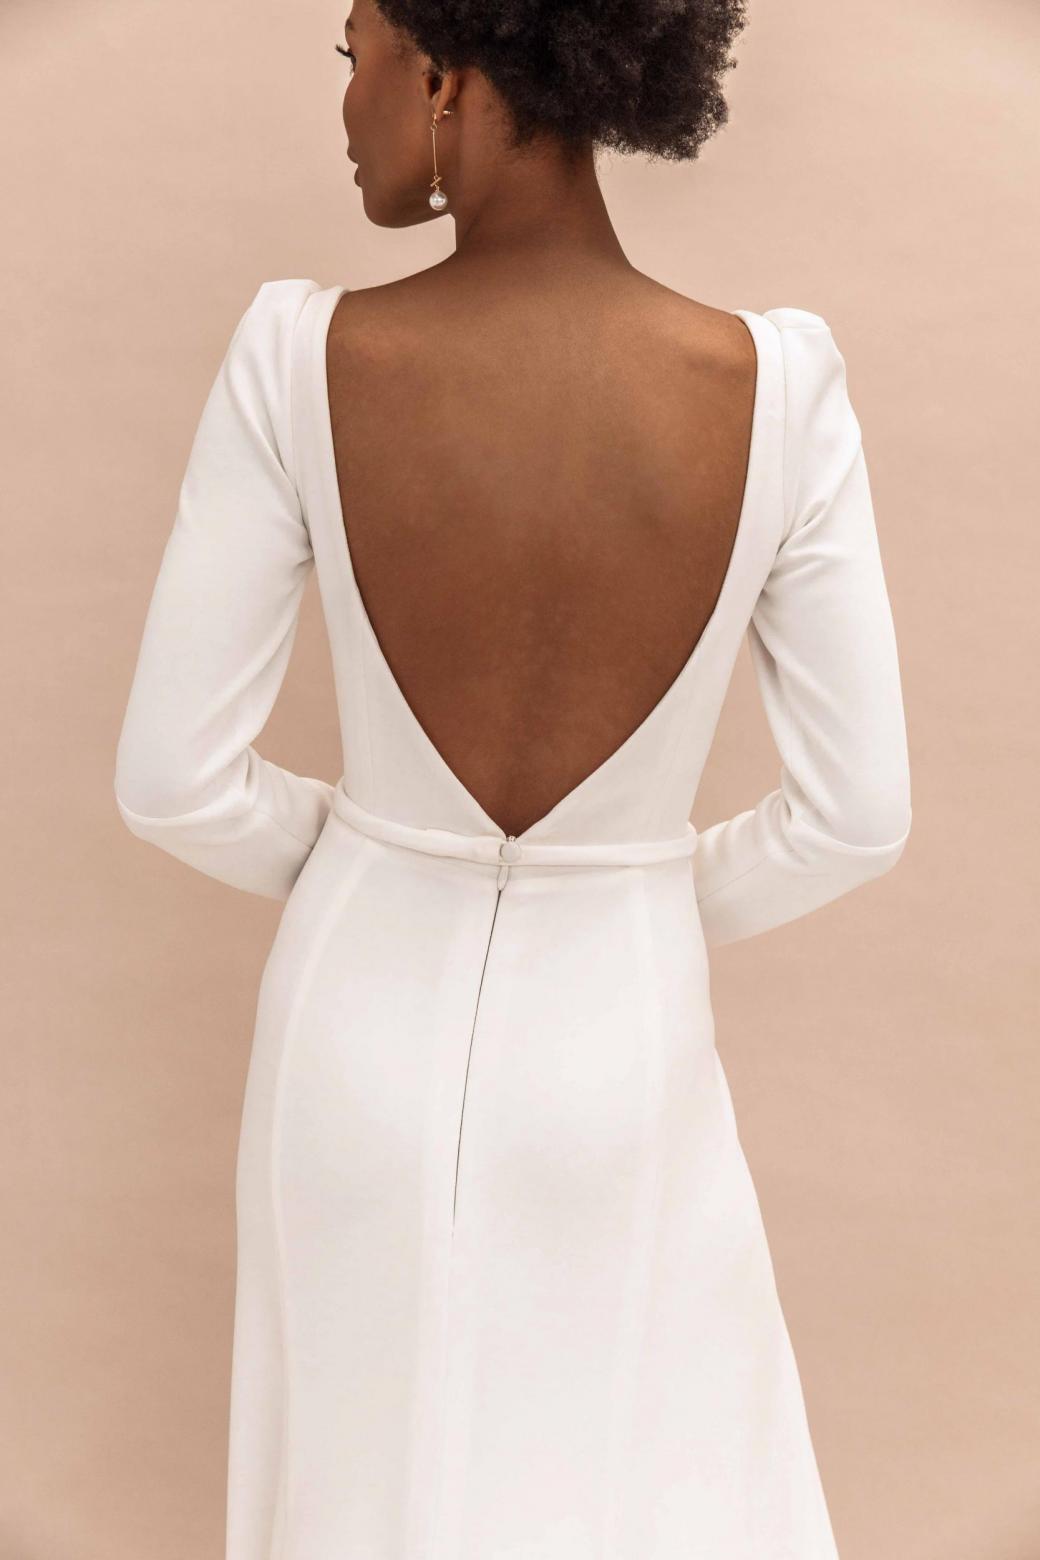 The Aubrey gown by Karen Willis Holmes, open back simple wedding dress with sleeves.